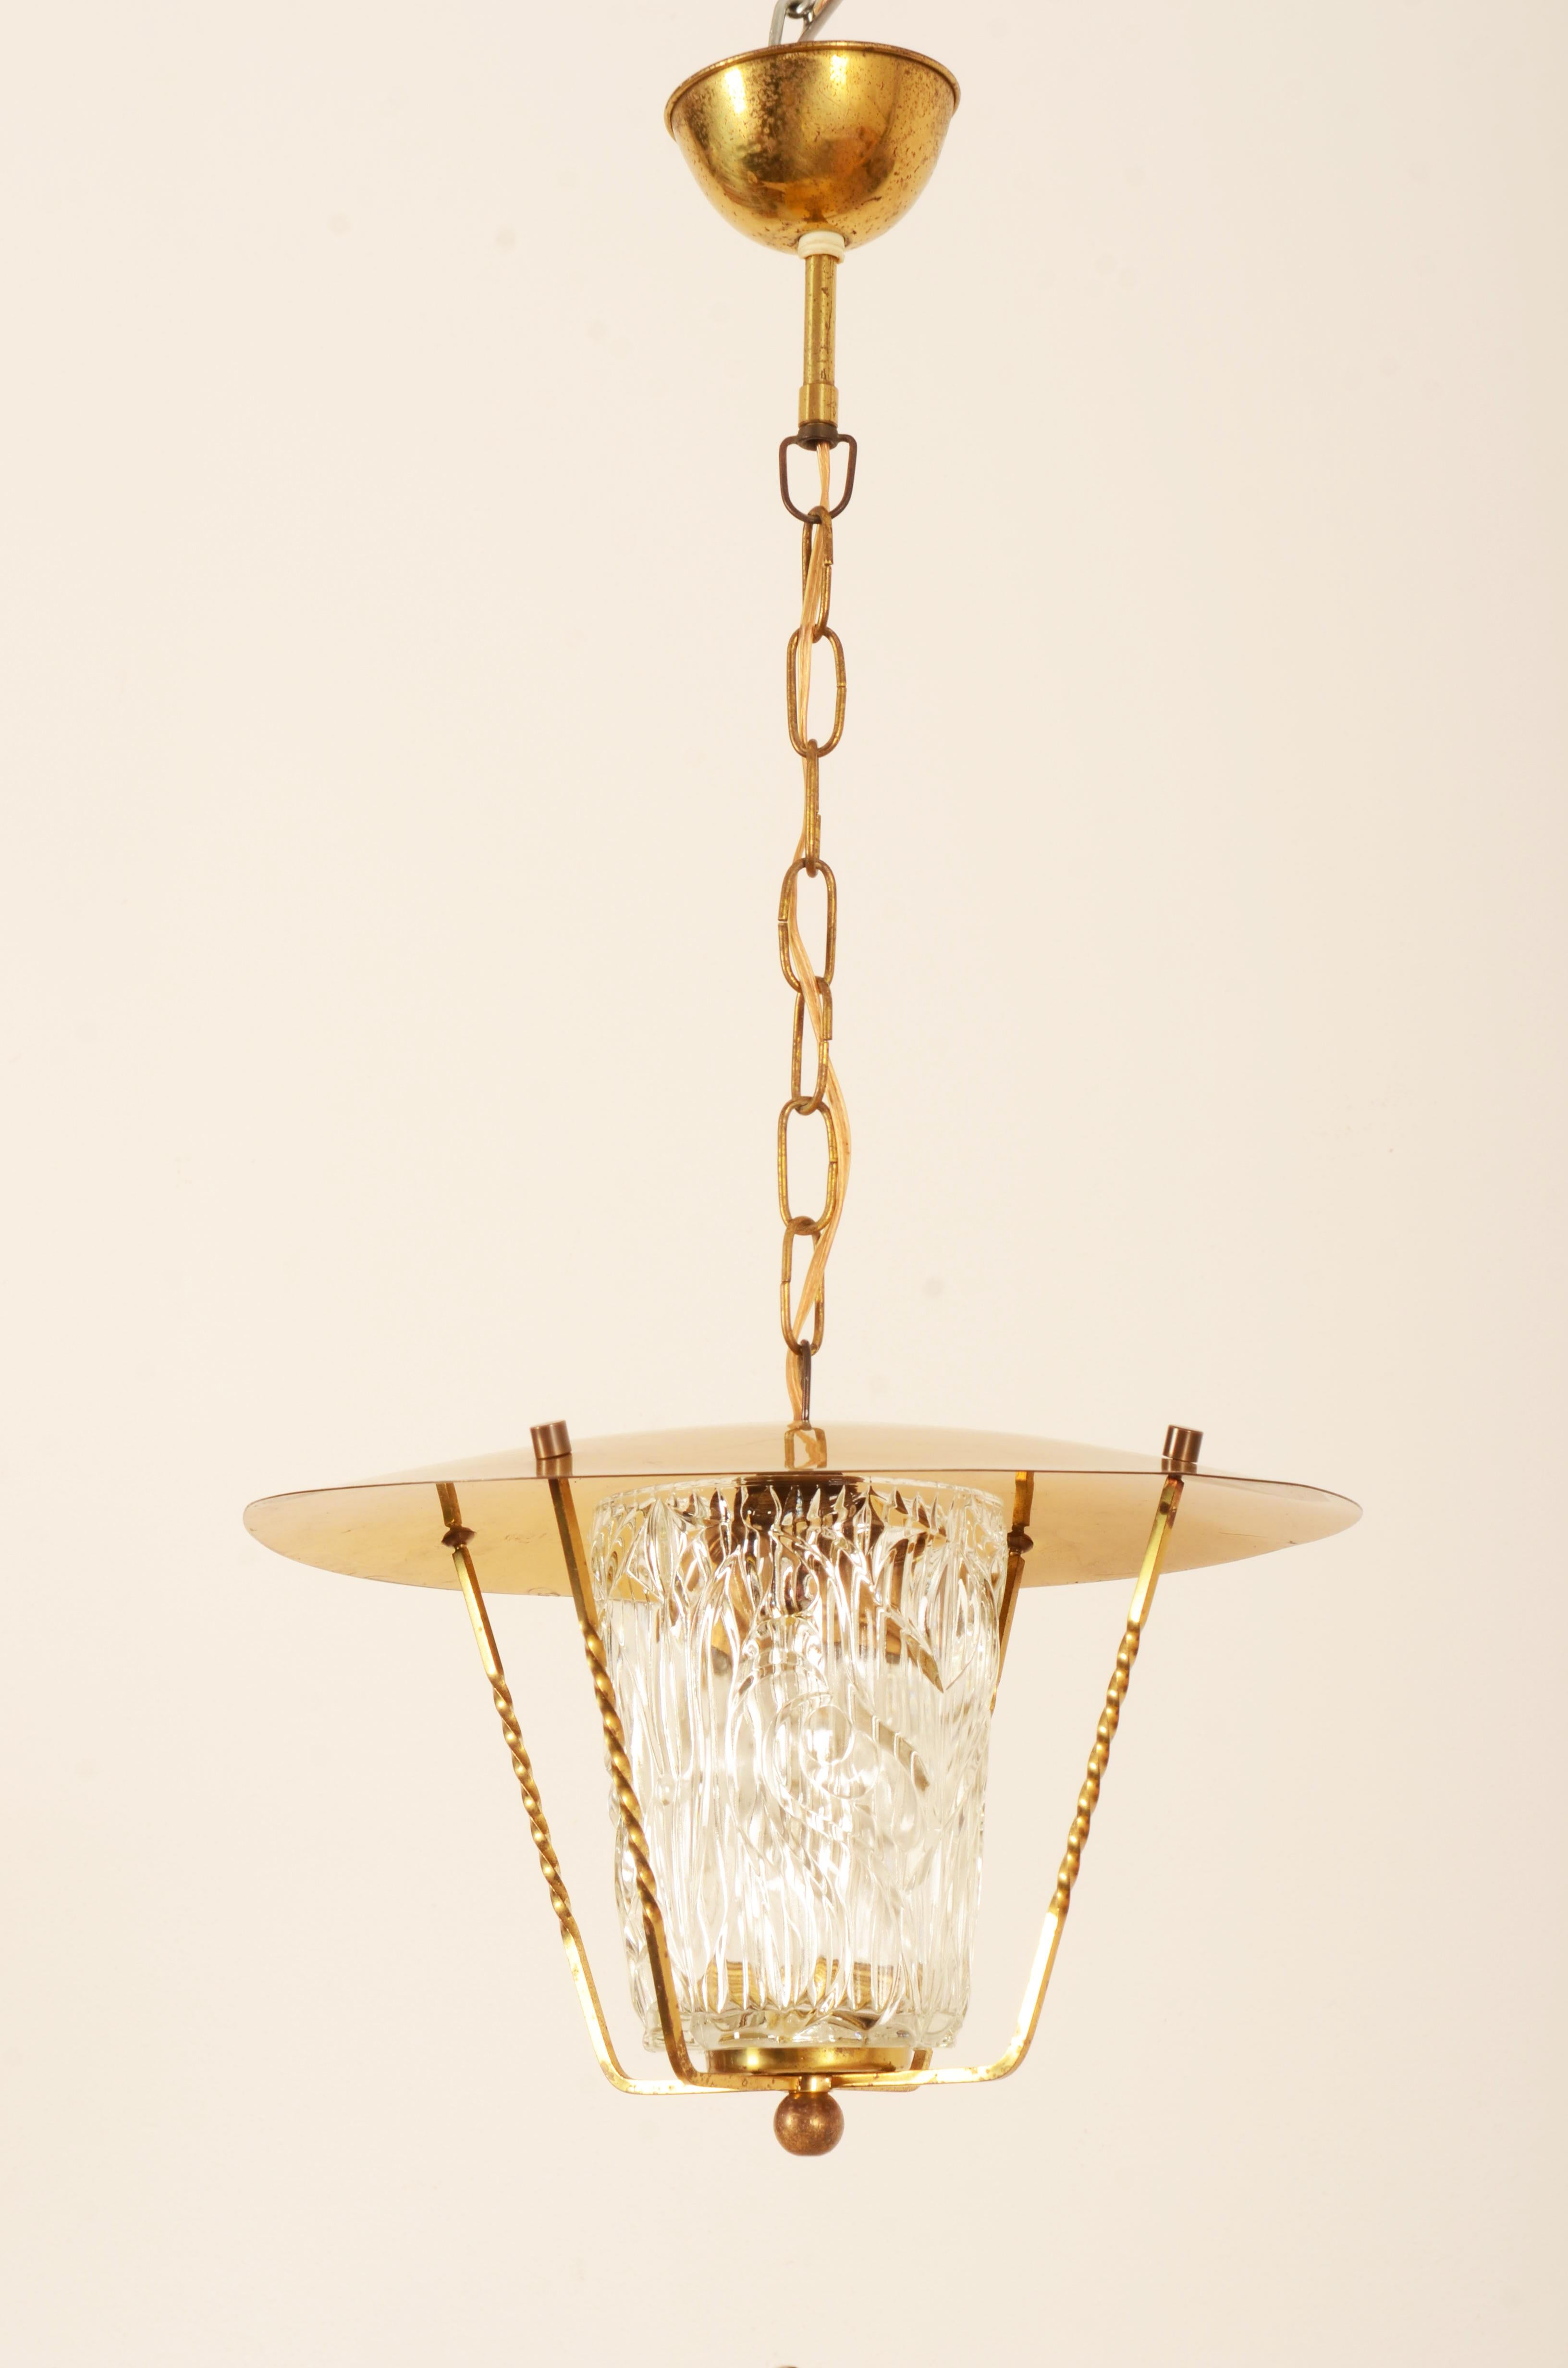 Mid-20th Century Midcentury Brass Pendant Lamp With Structured Glass Shade  For Sale